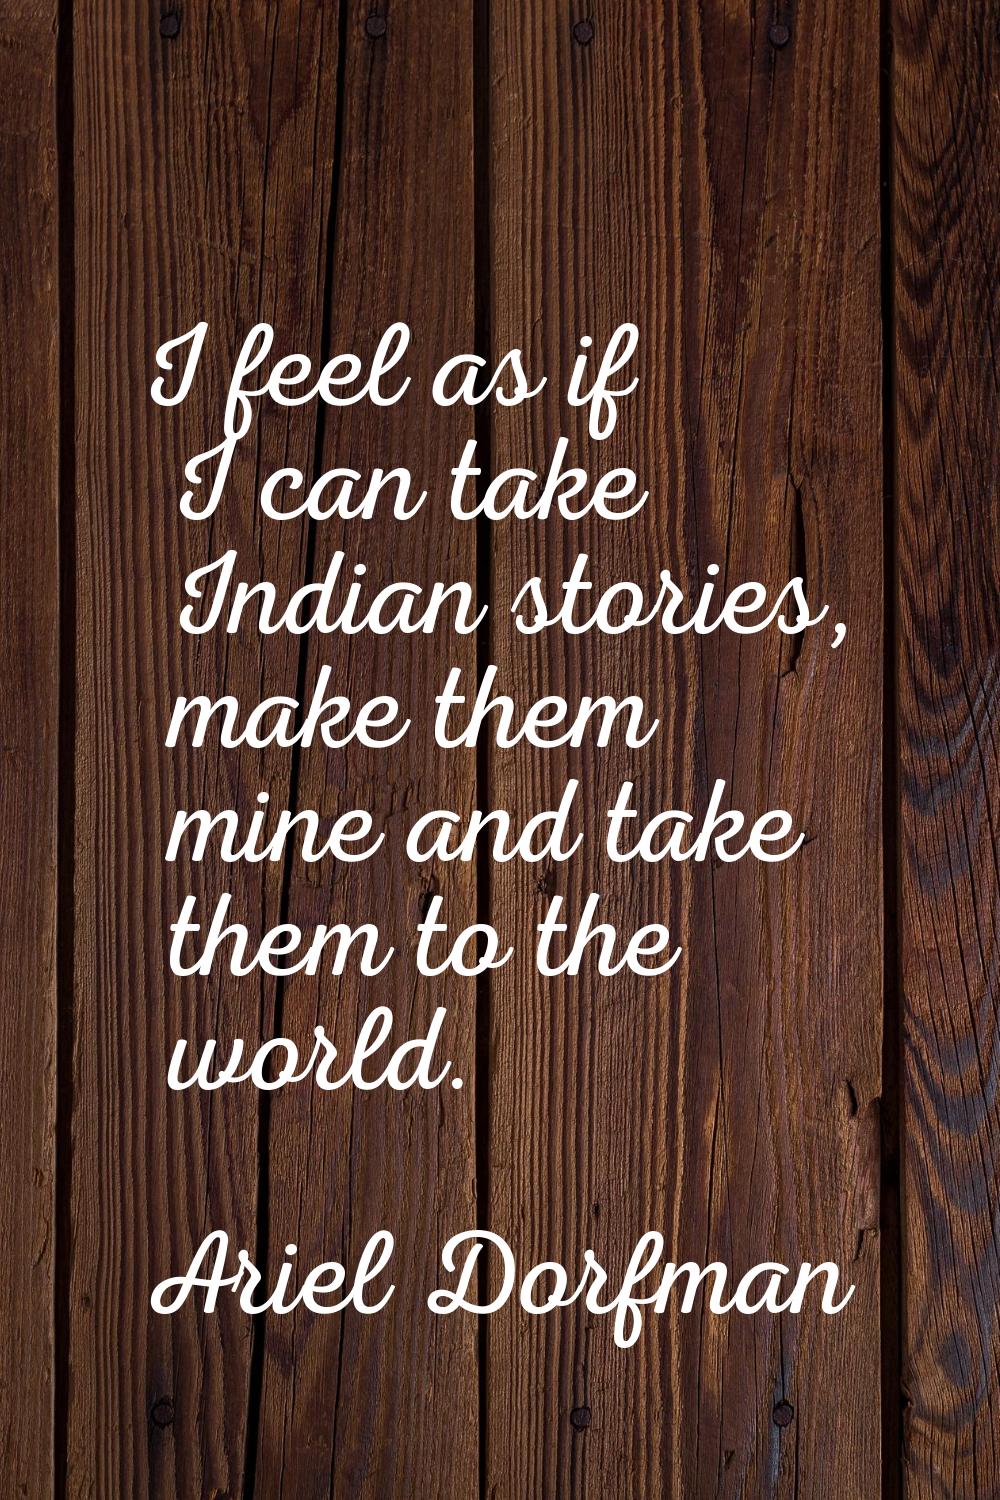 I feel as if I can take Indian stories, make them mine and take them to the world.